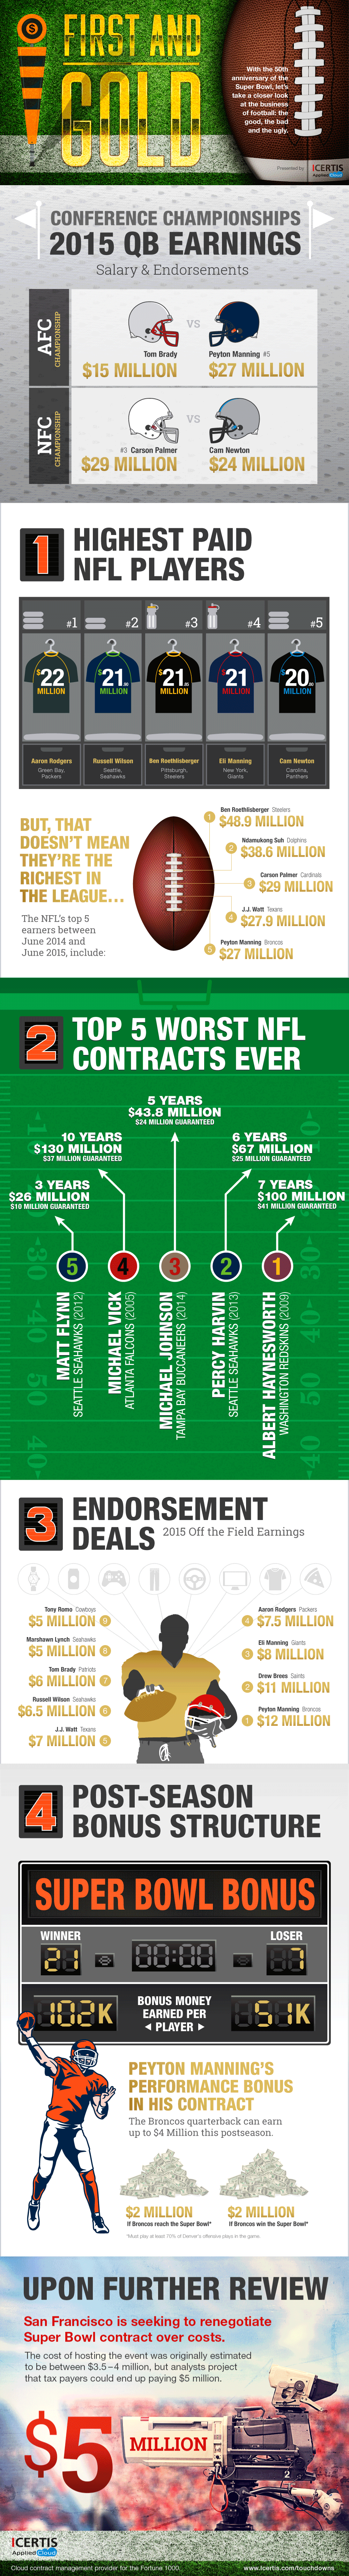 nfl-super-bowl-infographic-contracts